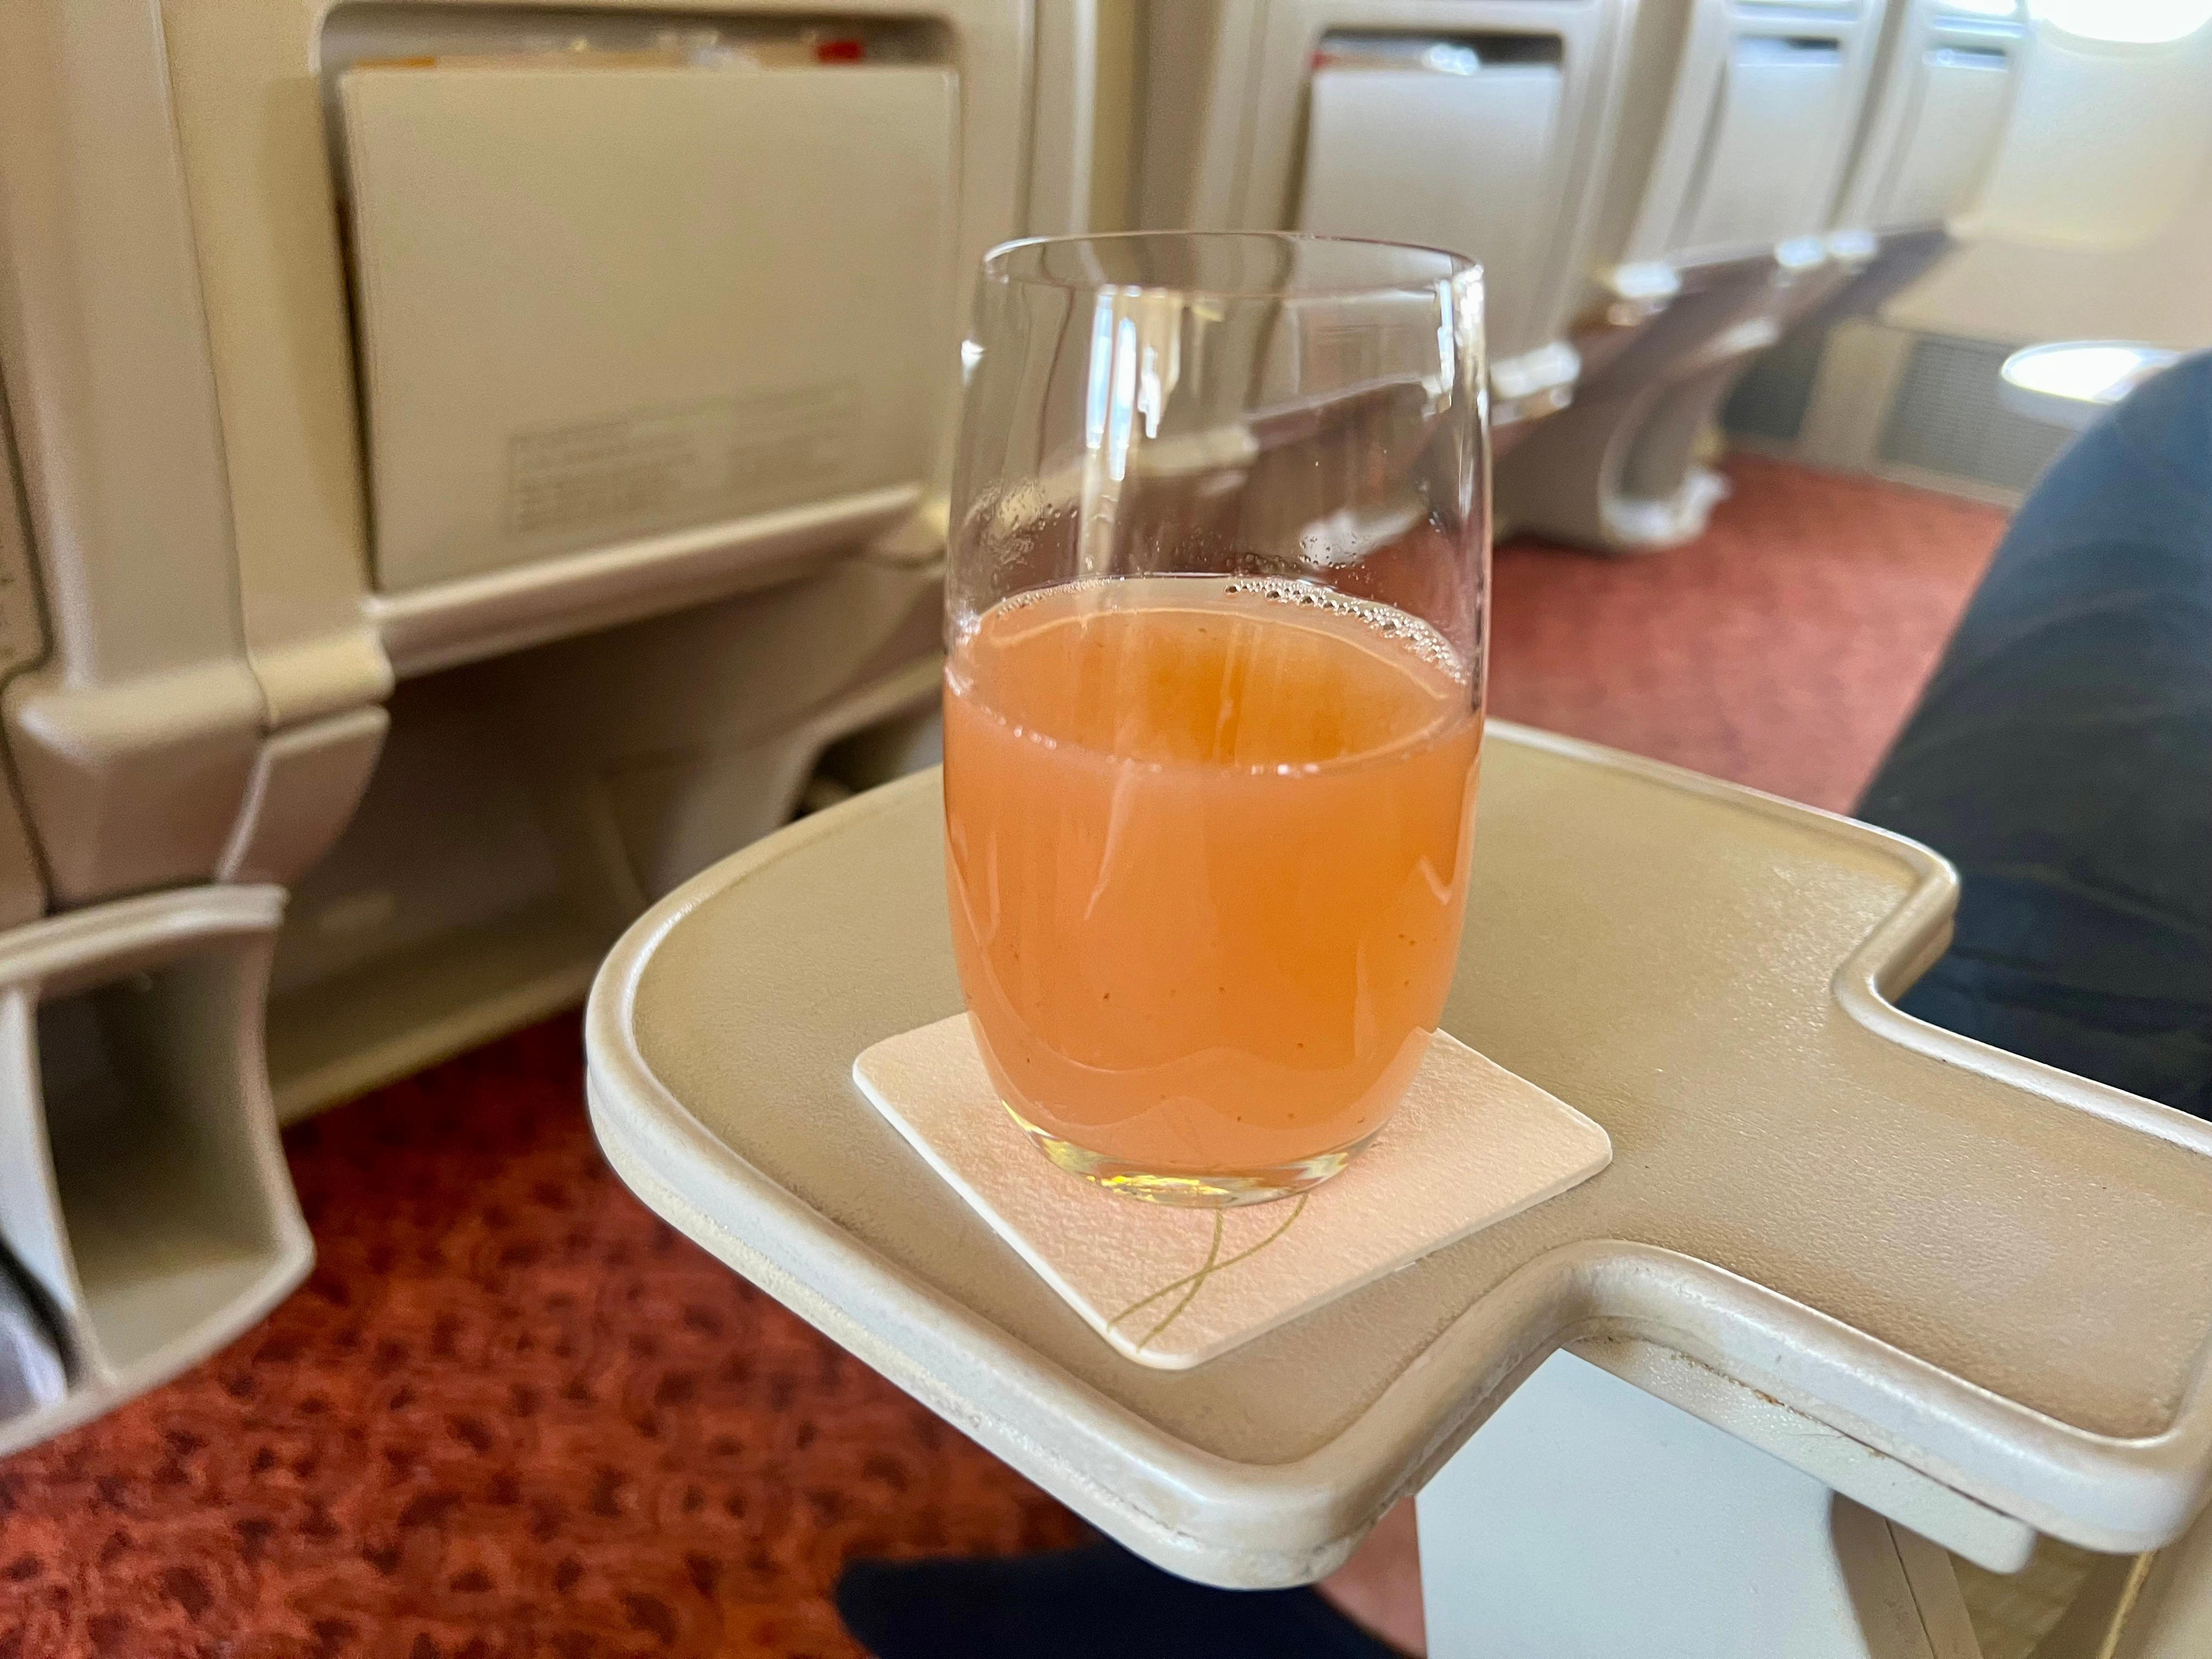 <p>The towel and drink are common perks in business class, and I thought the juice was tasty. I could've also opted for an alcoholic beverage if I wanted.</p>